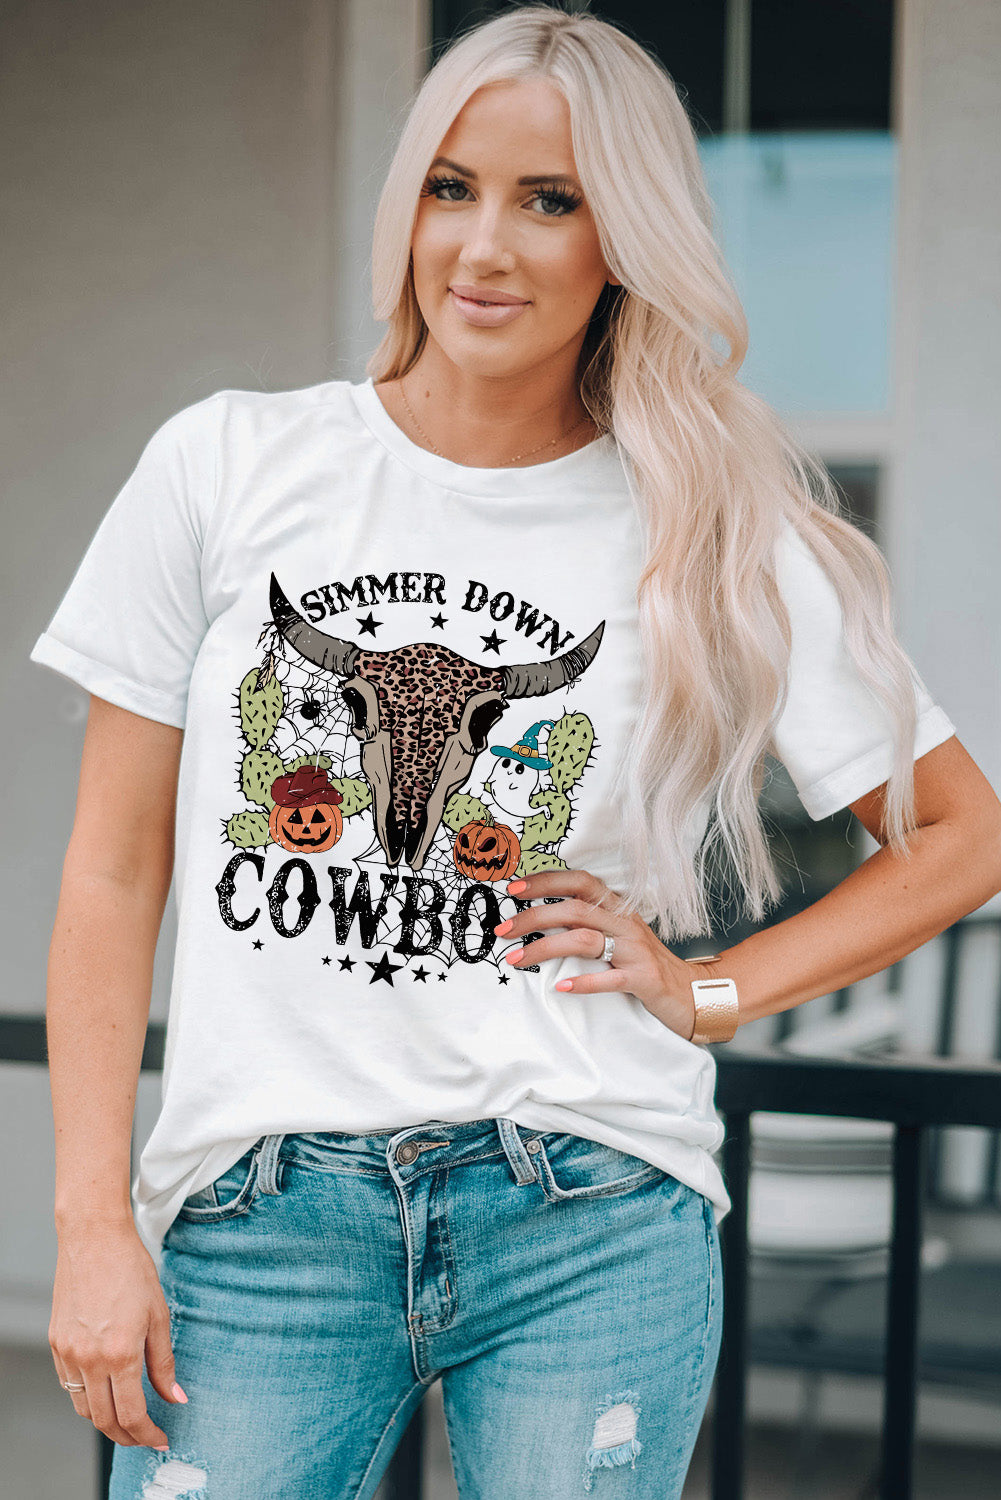 Show Off Your Western Spirit with the COWGIRL Graphic Short Sleeve T-Shirt